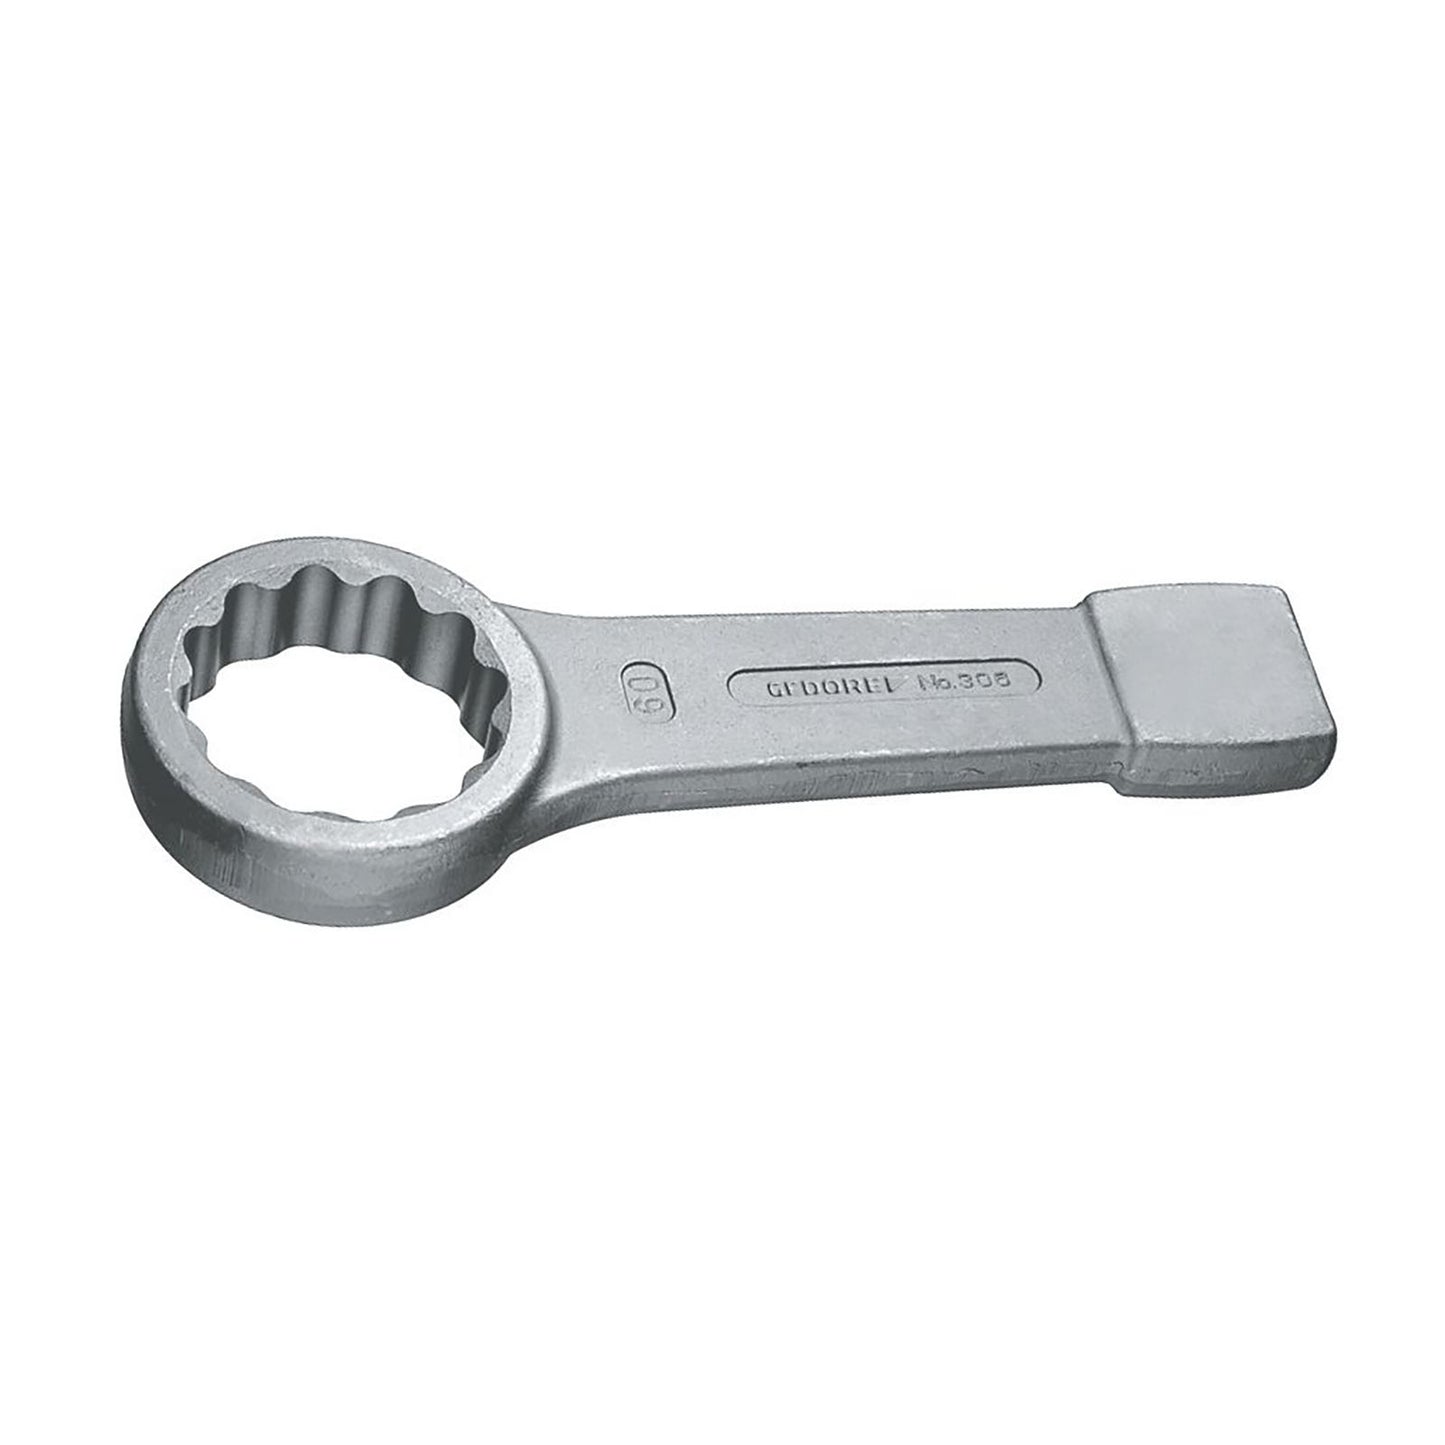 GEDORE 306 105 - Closed Strike Wrench, 105mm (6476910)